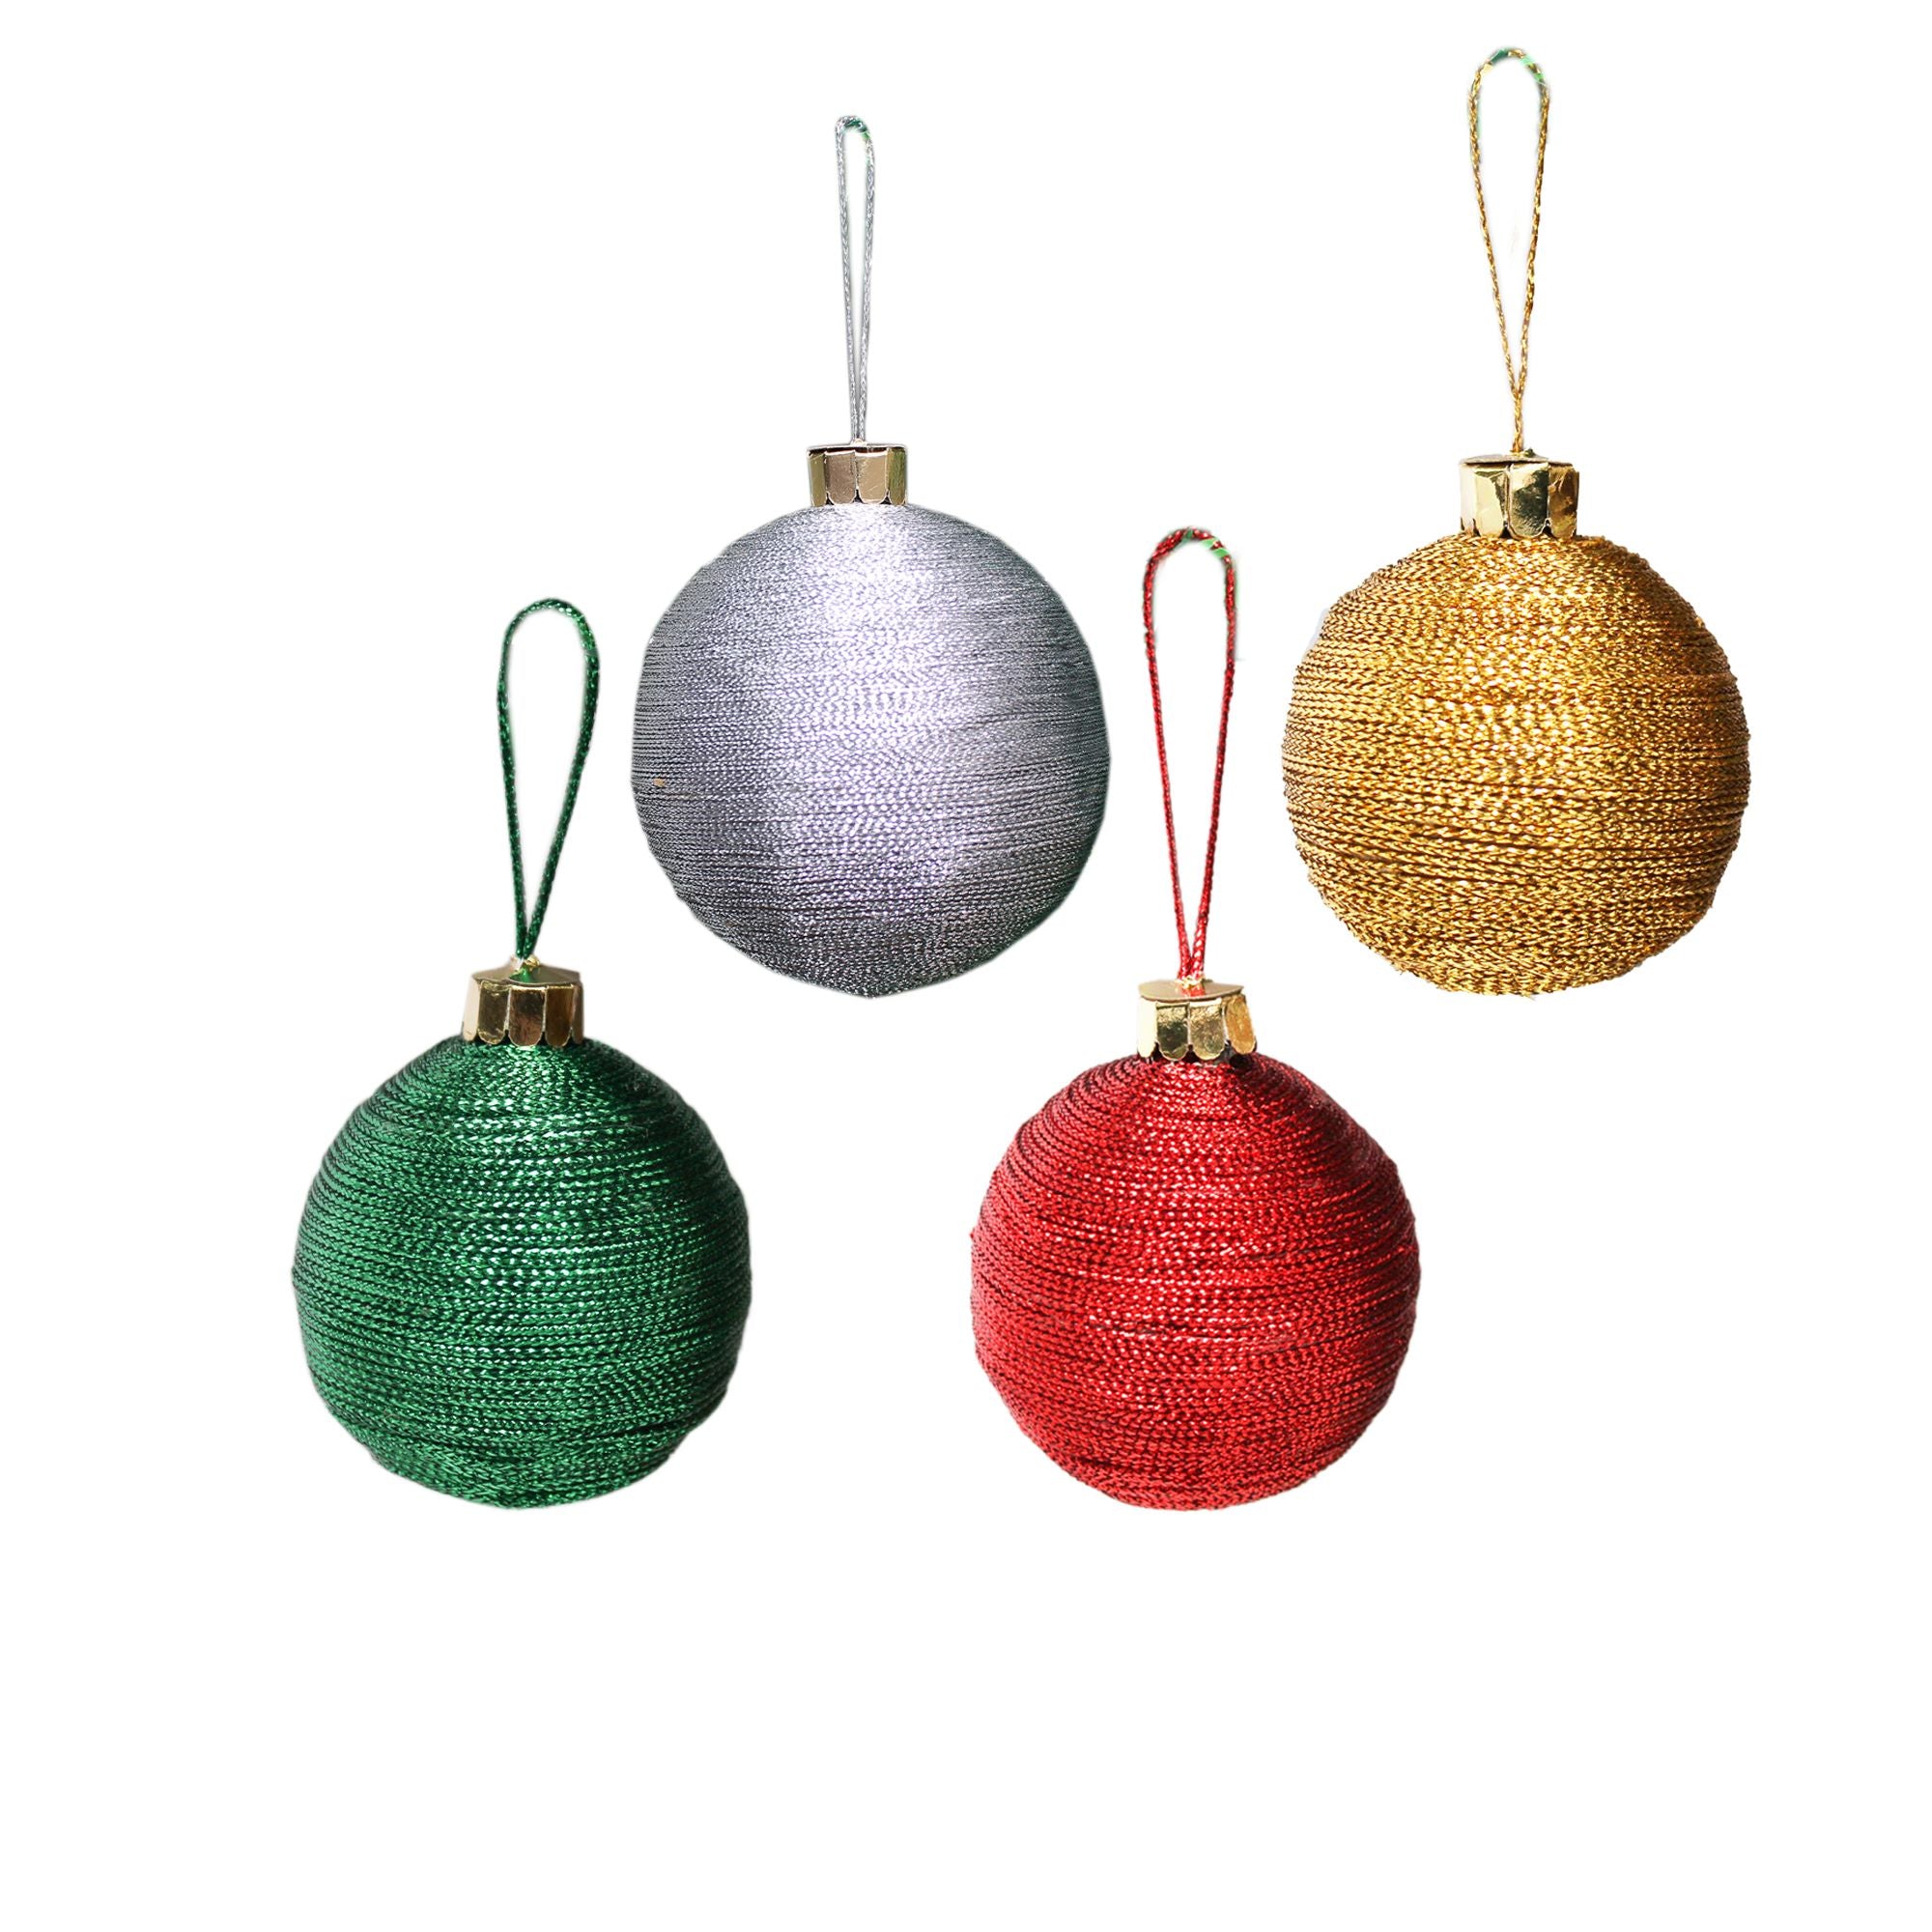 Handmade Christmas Ornaments - Lurex Baubles, 50mm, Assorted Colours - Red, Green, Gold, Silver, 4pc